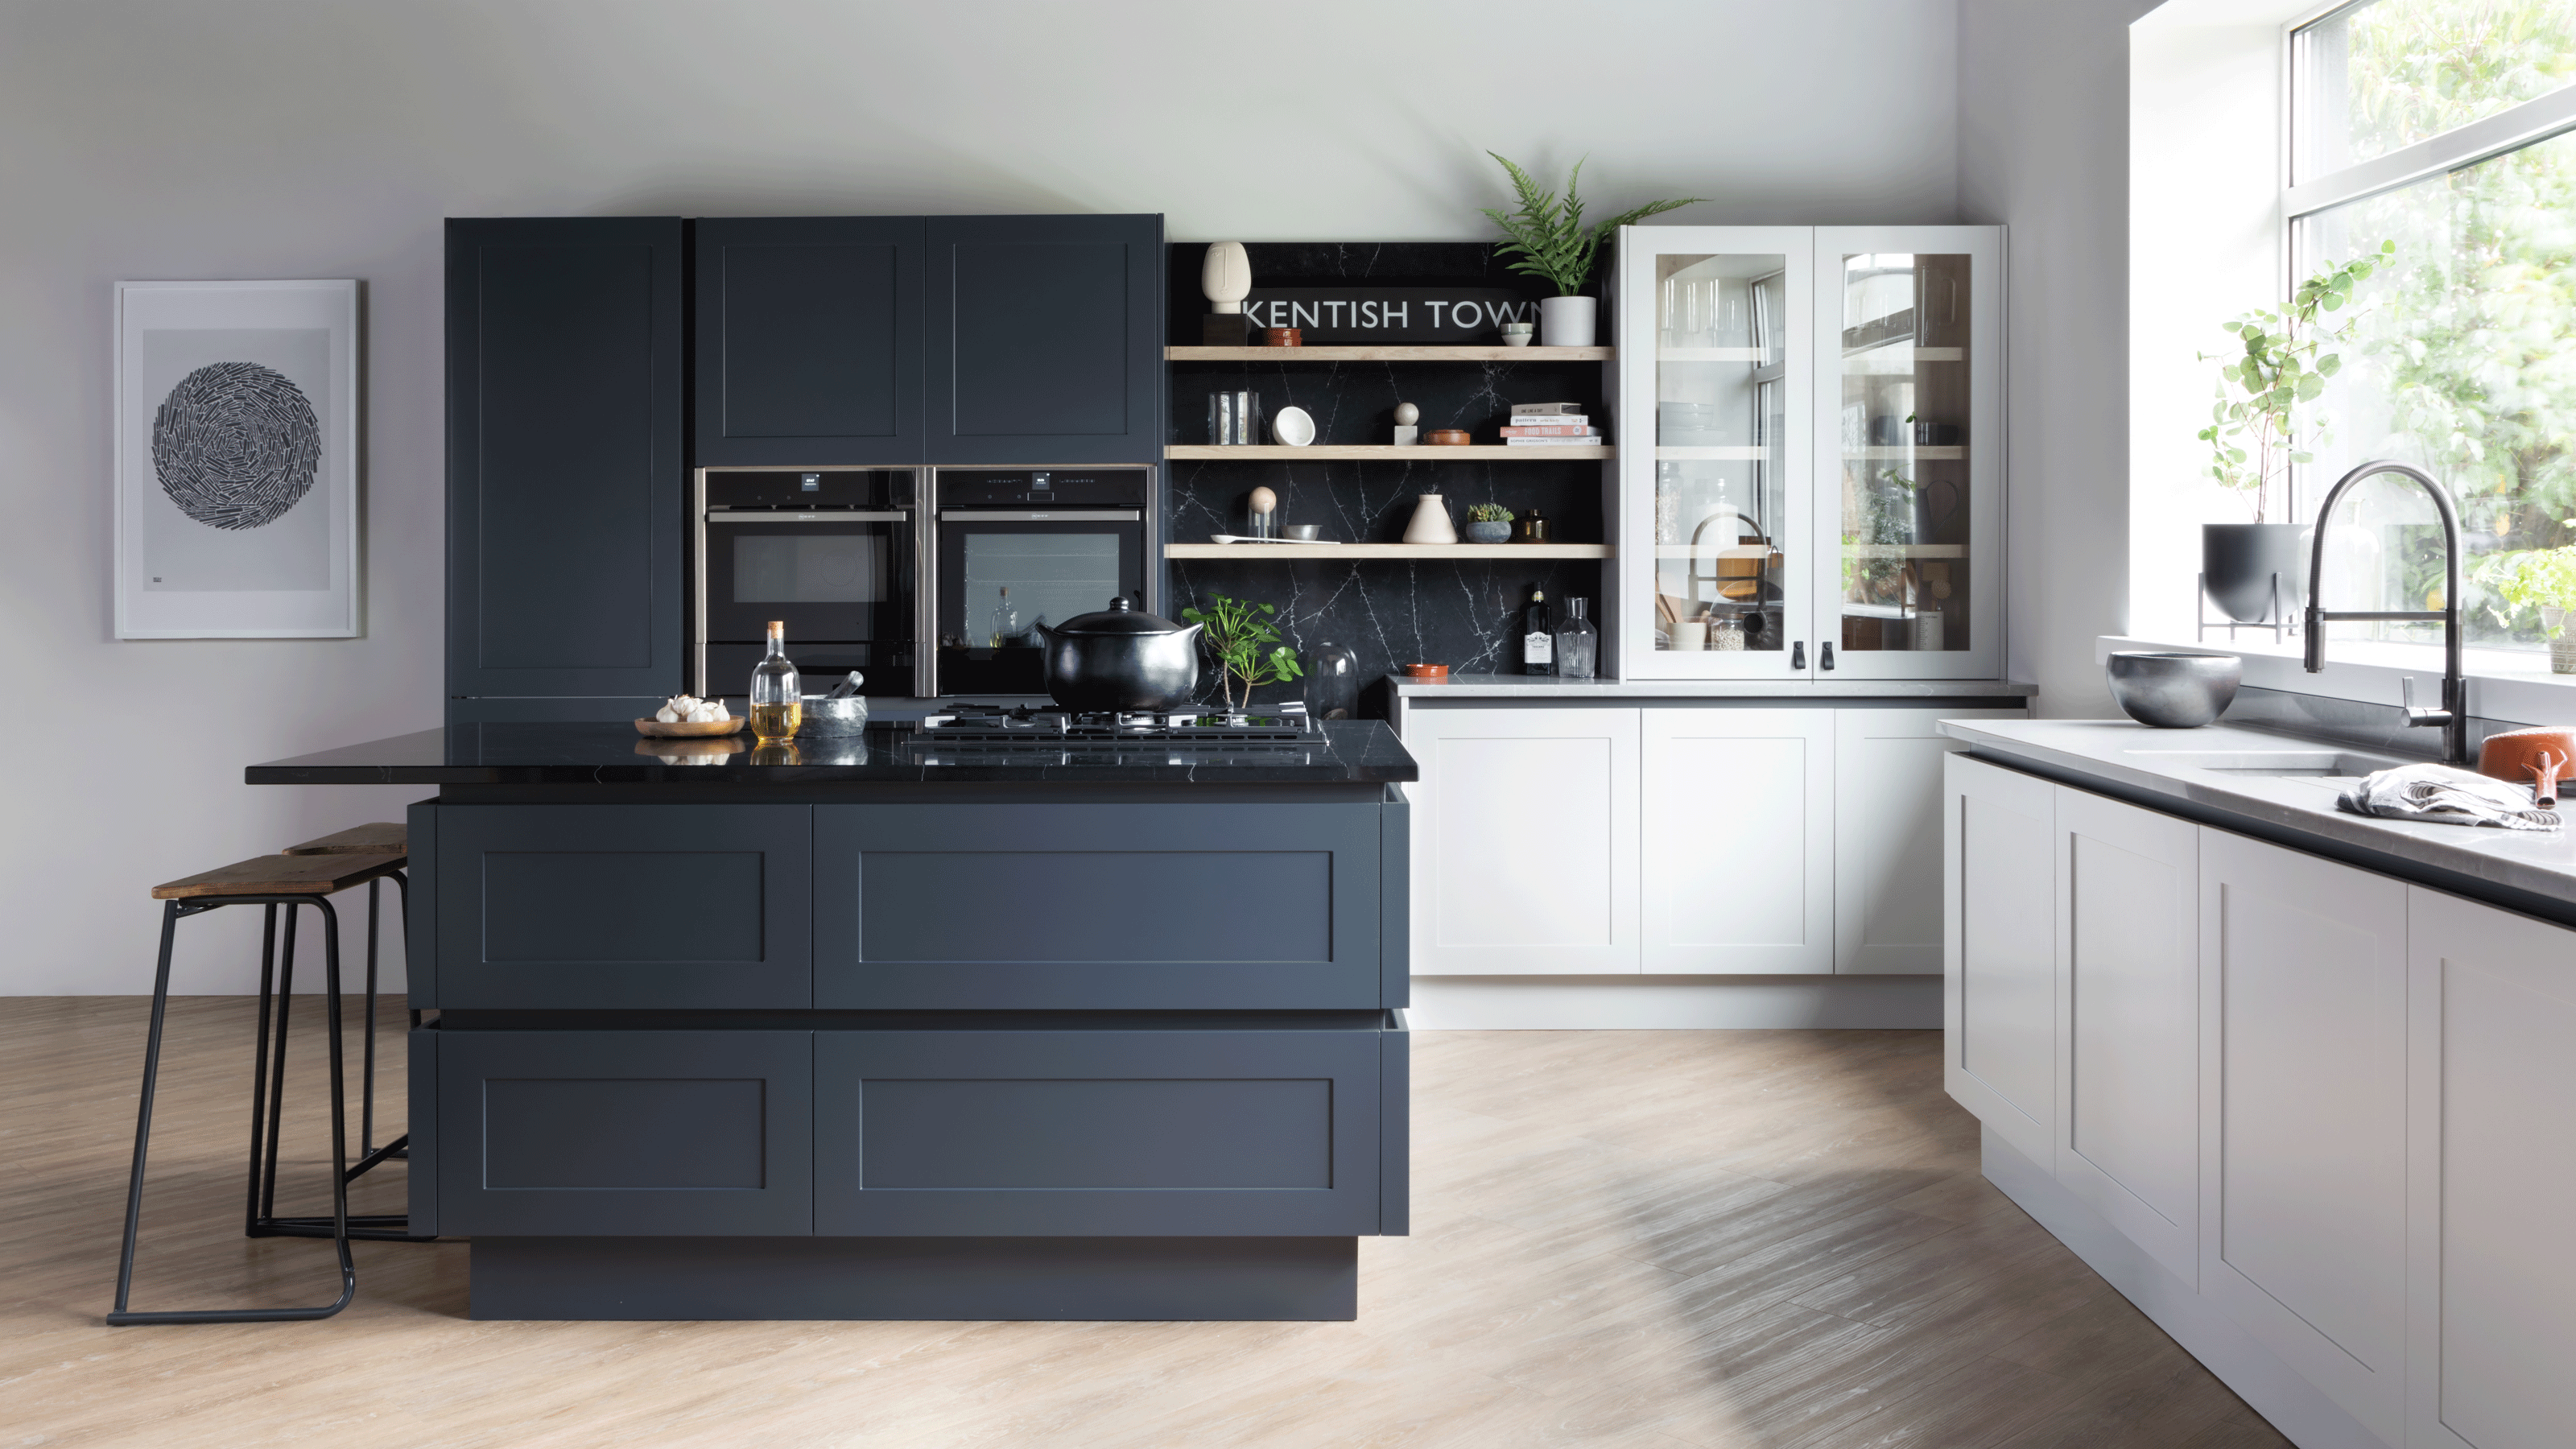 two-tone kitchens: 8 ideas for cabinets and islands in two colors |